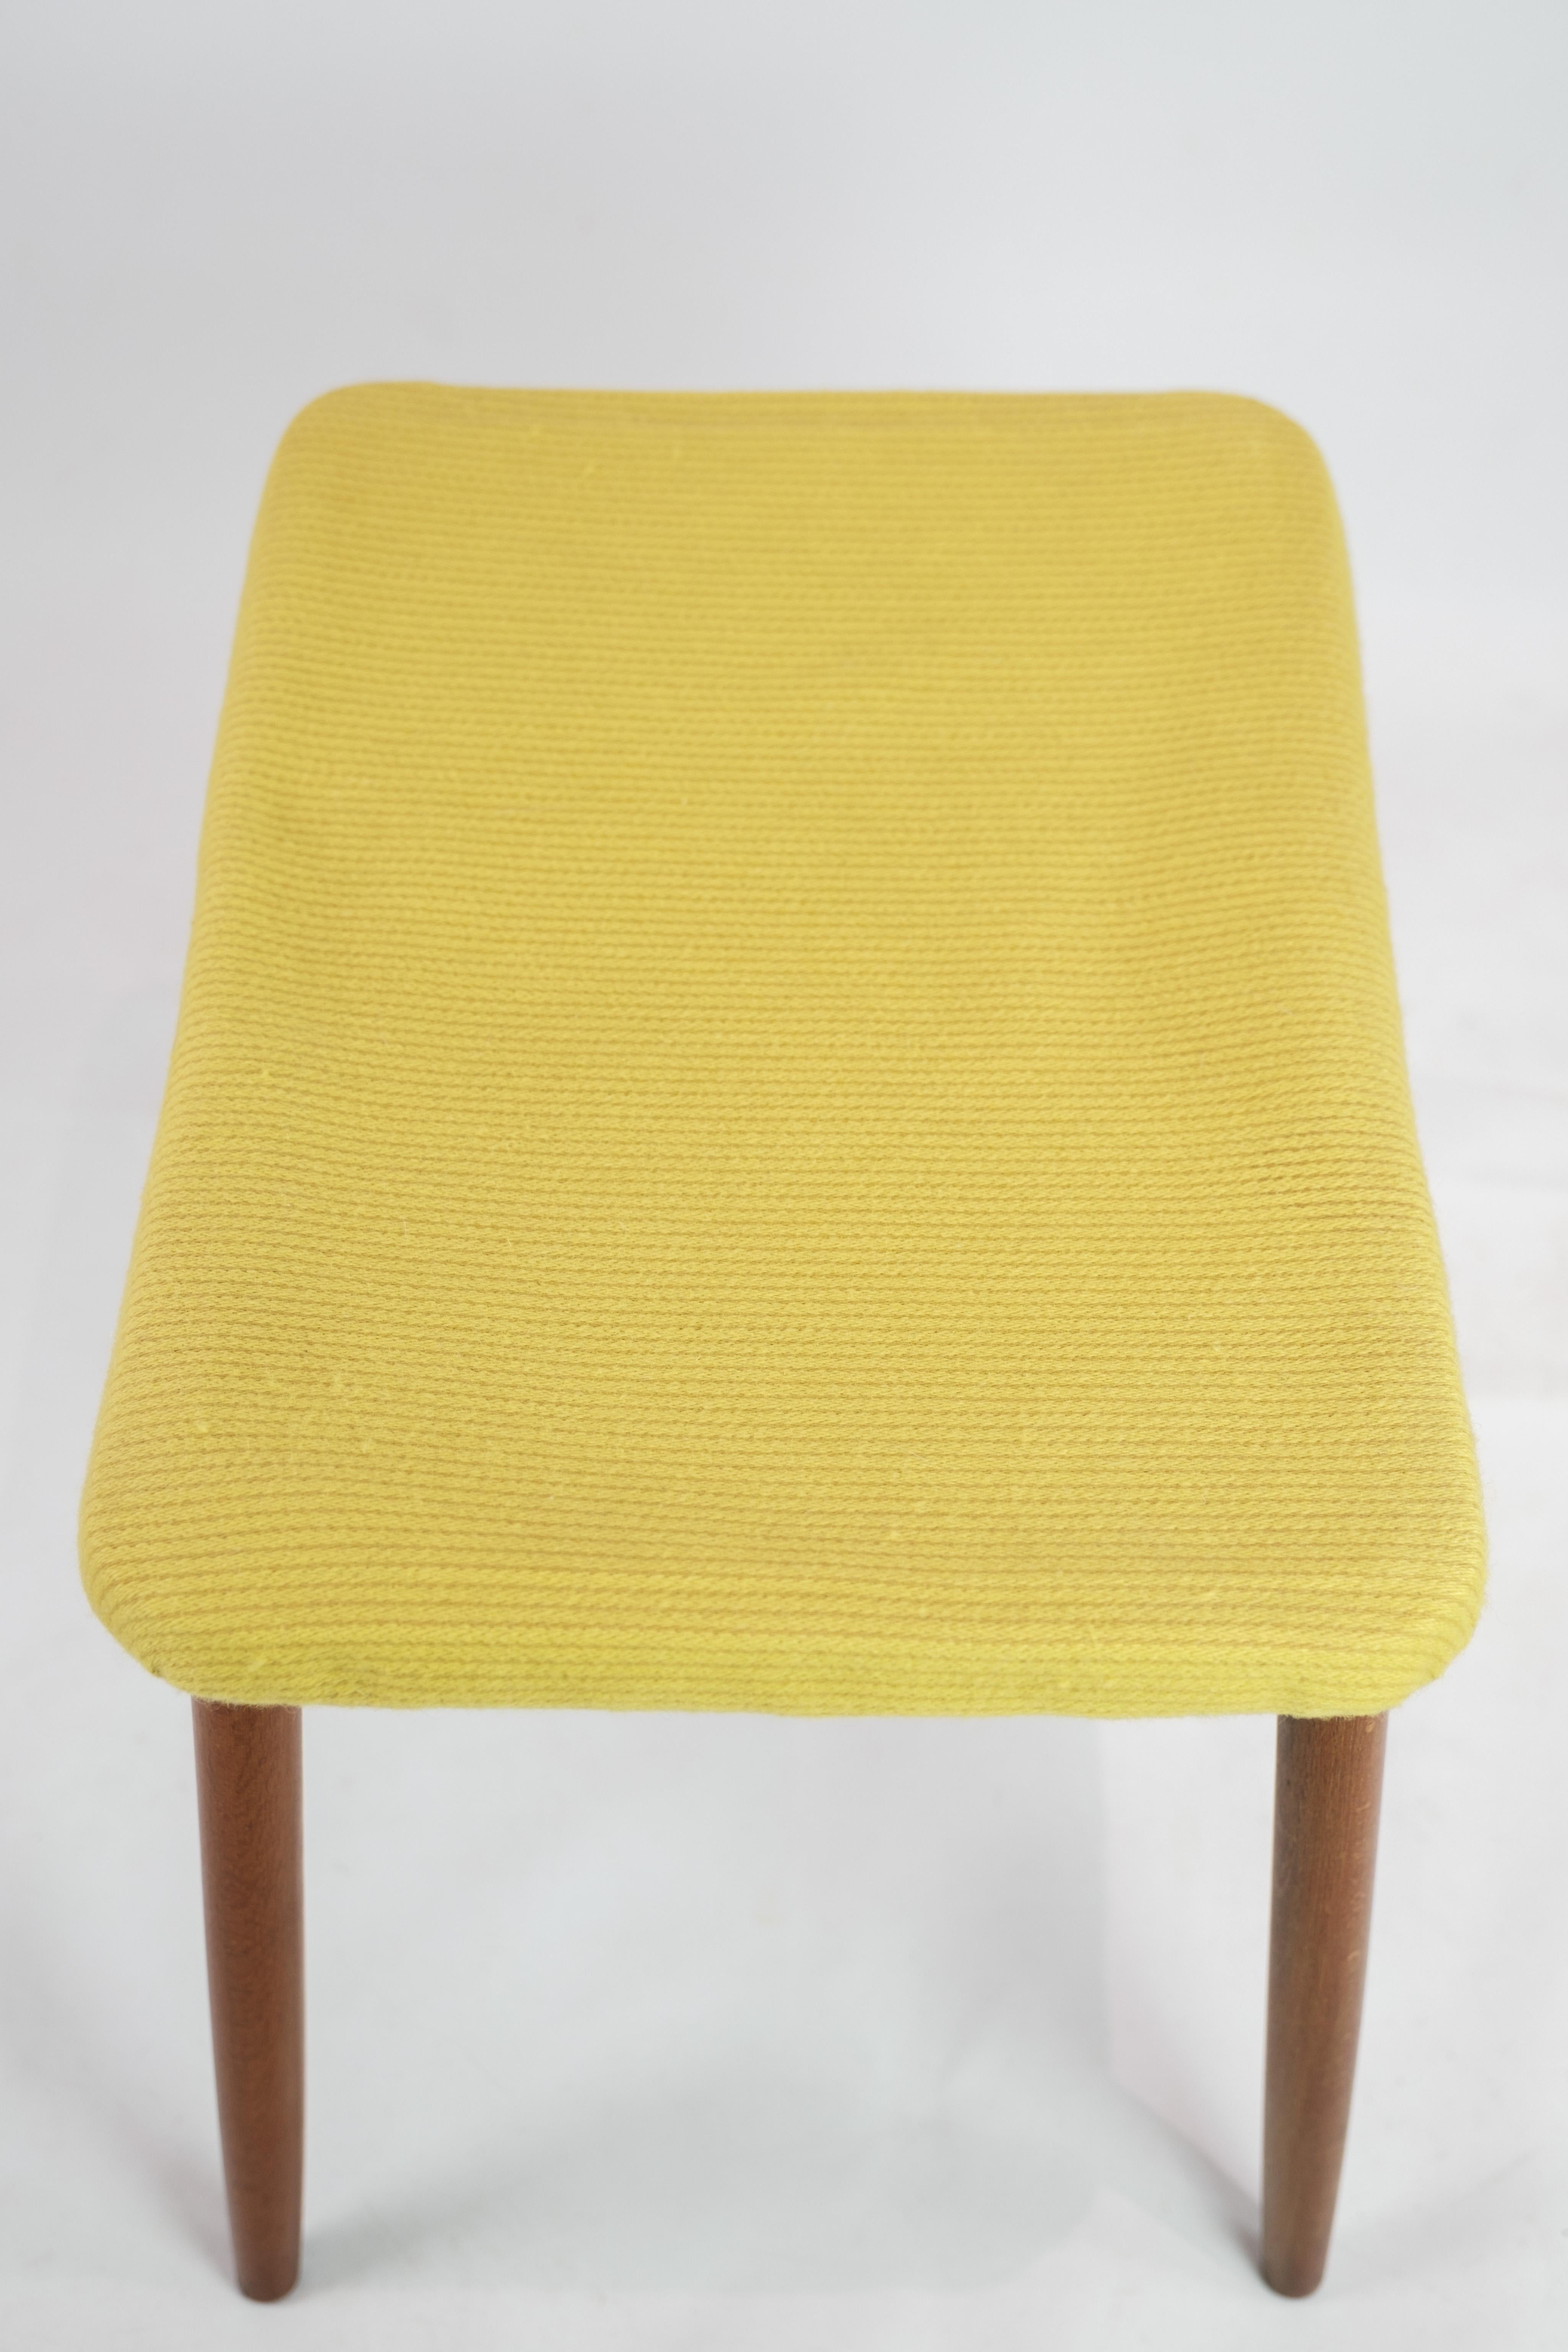 Vintage Stools With Yellow Fabric & Teak Legs From 1960s In Good Condition For Sale In Lejre, DK